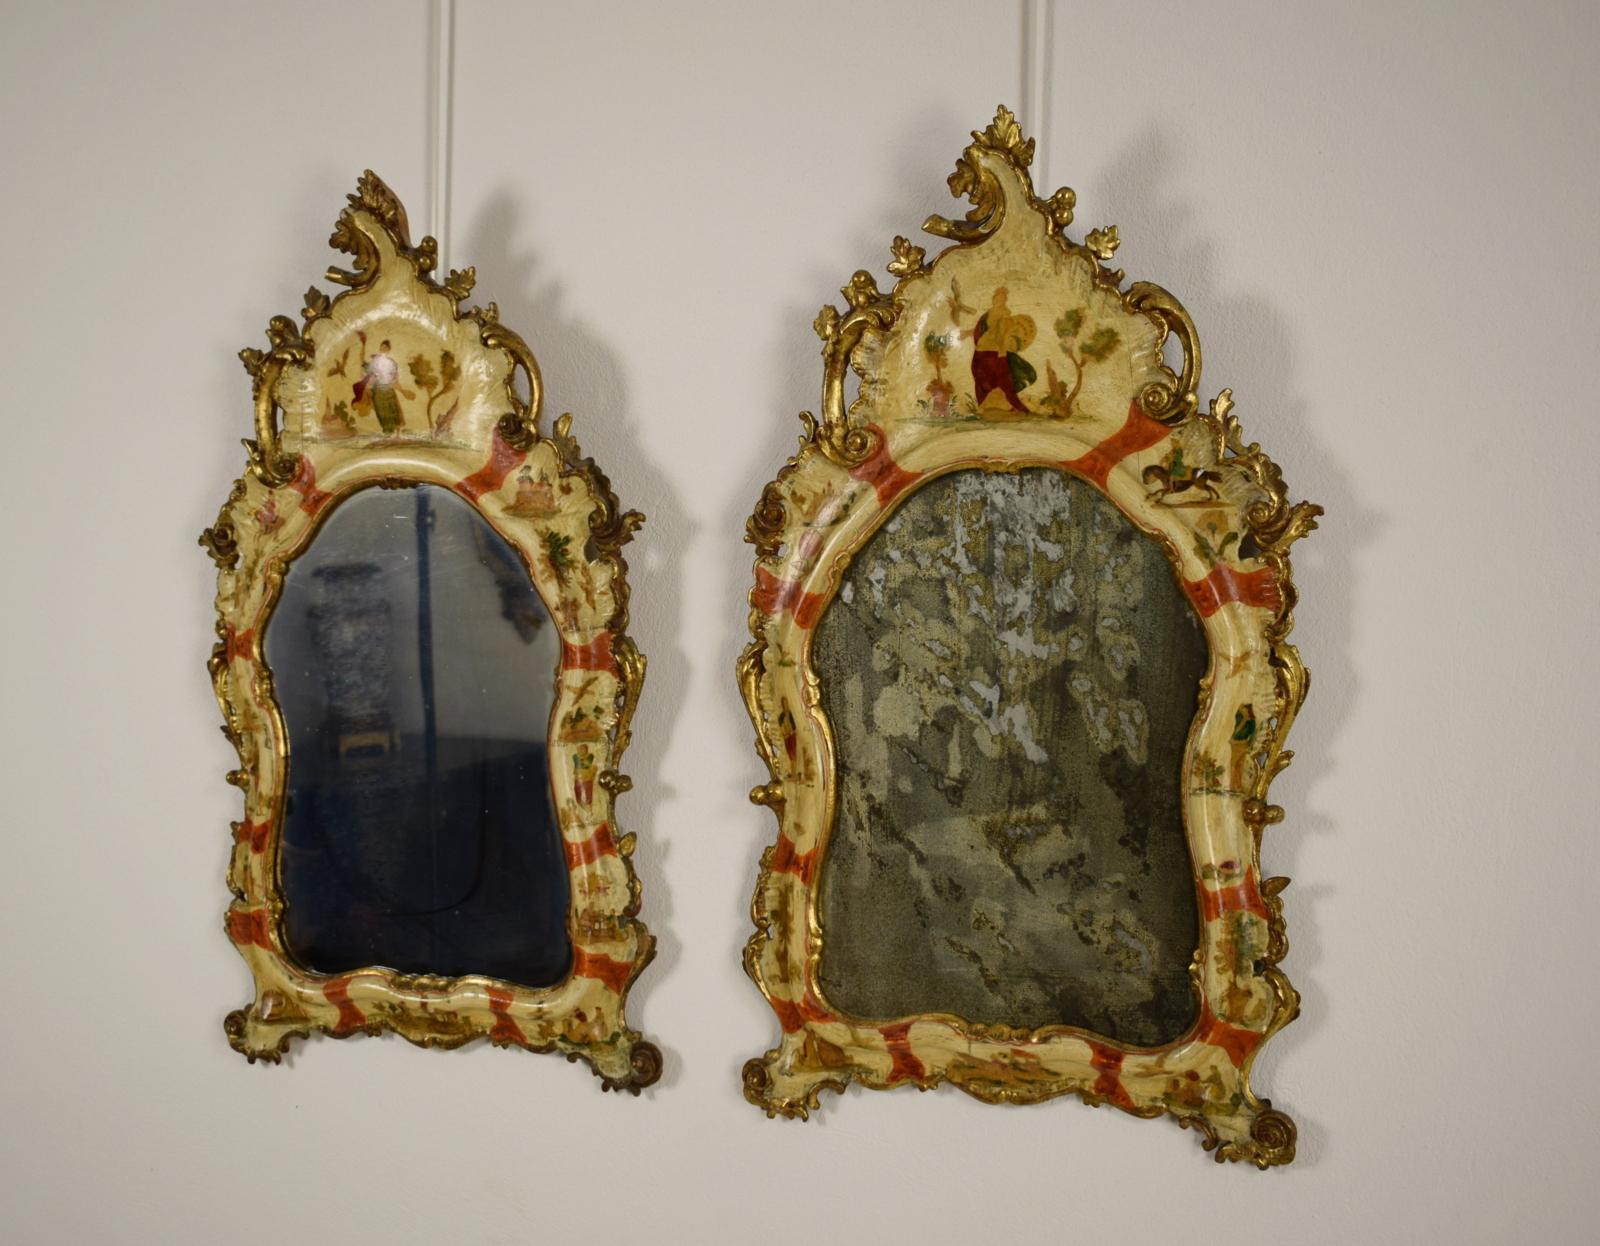 20th century, Venice Arte Povera lacquered wood, pair of wall mirrors.